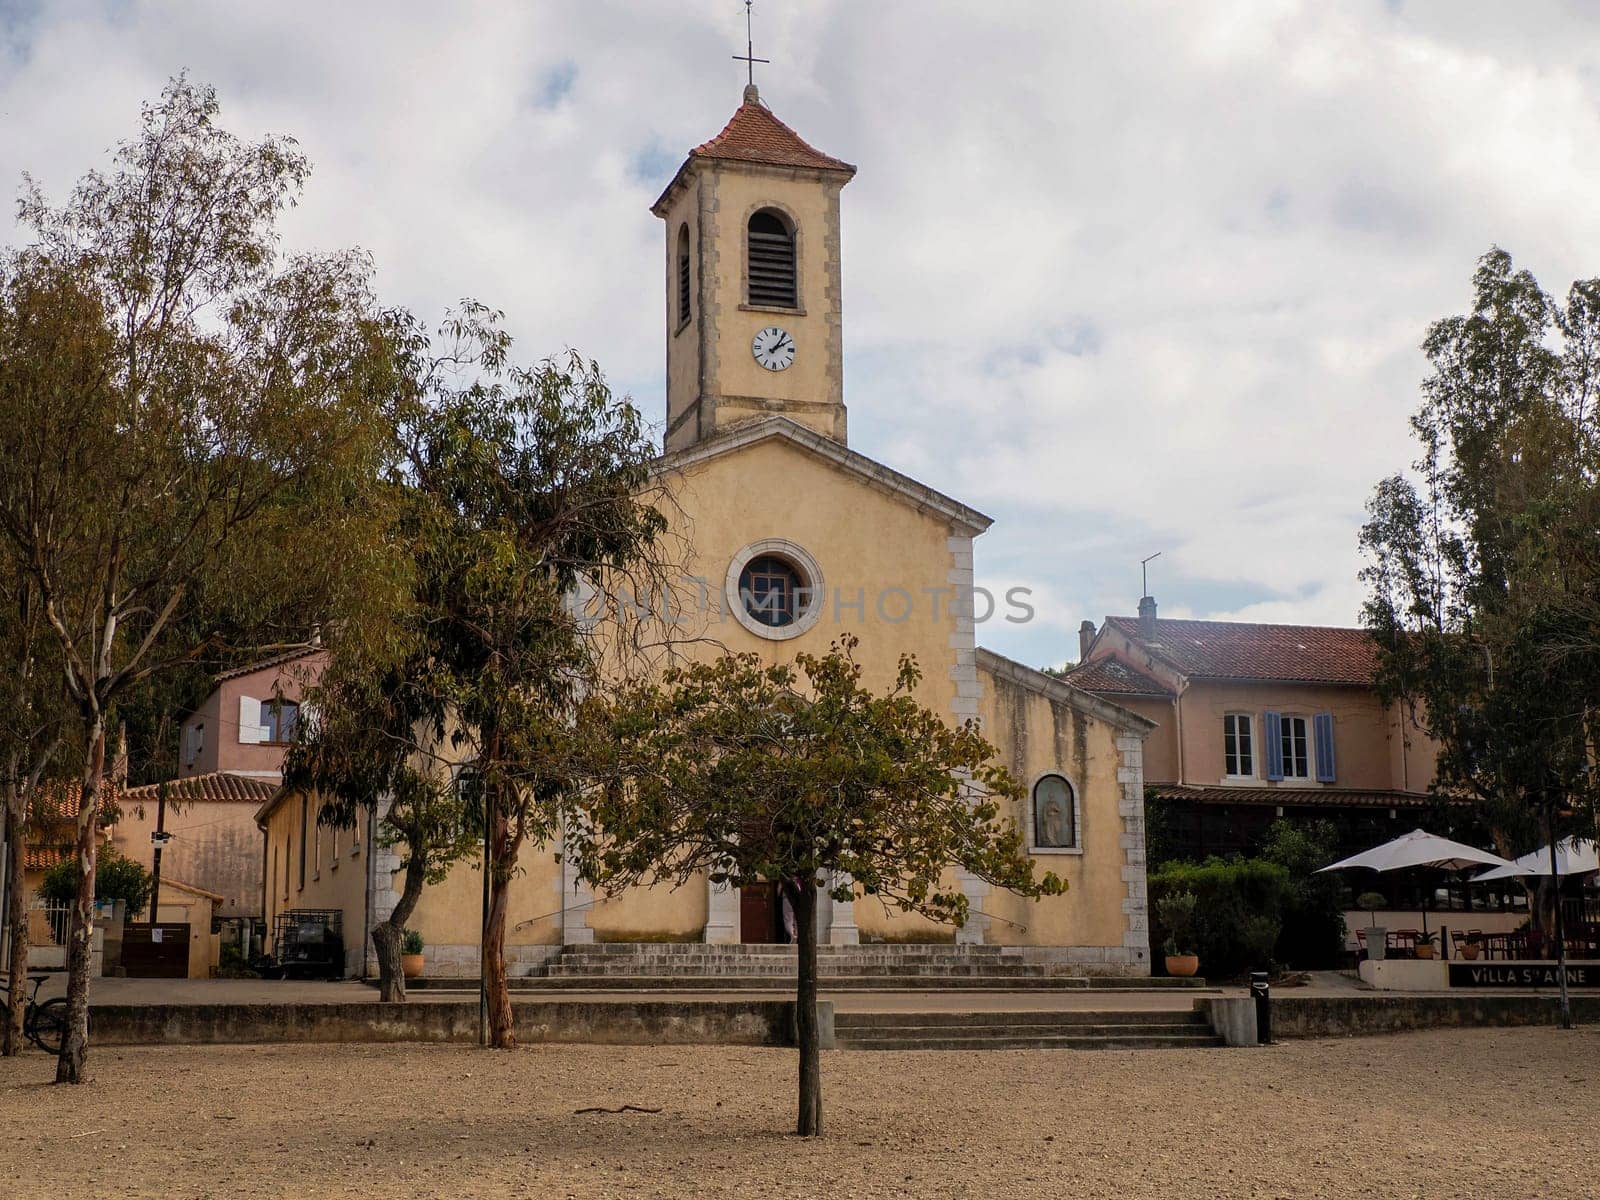 old church in main place of village of porquerolles island france panorama landscape by AndreaIzzotti